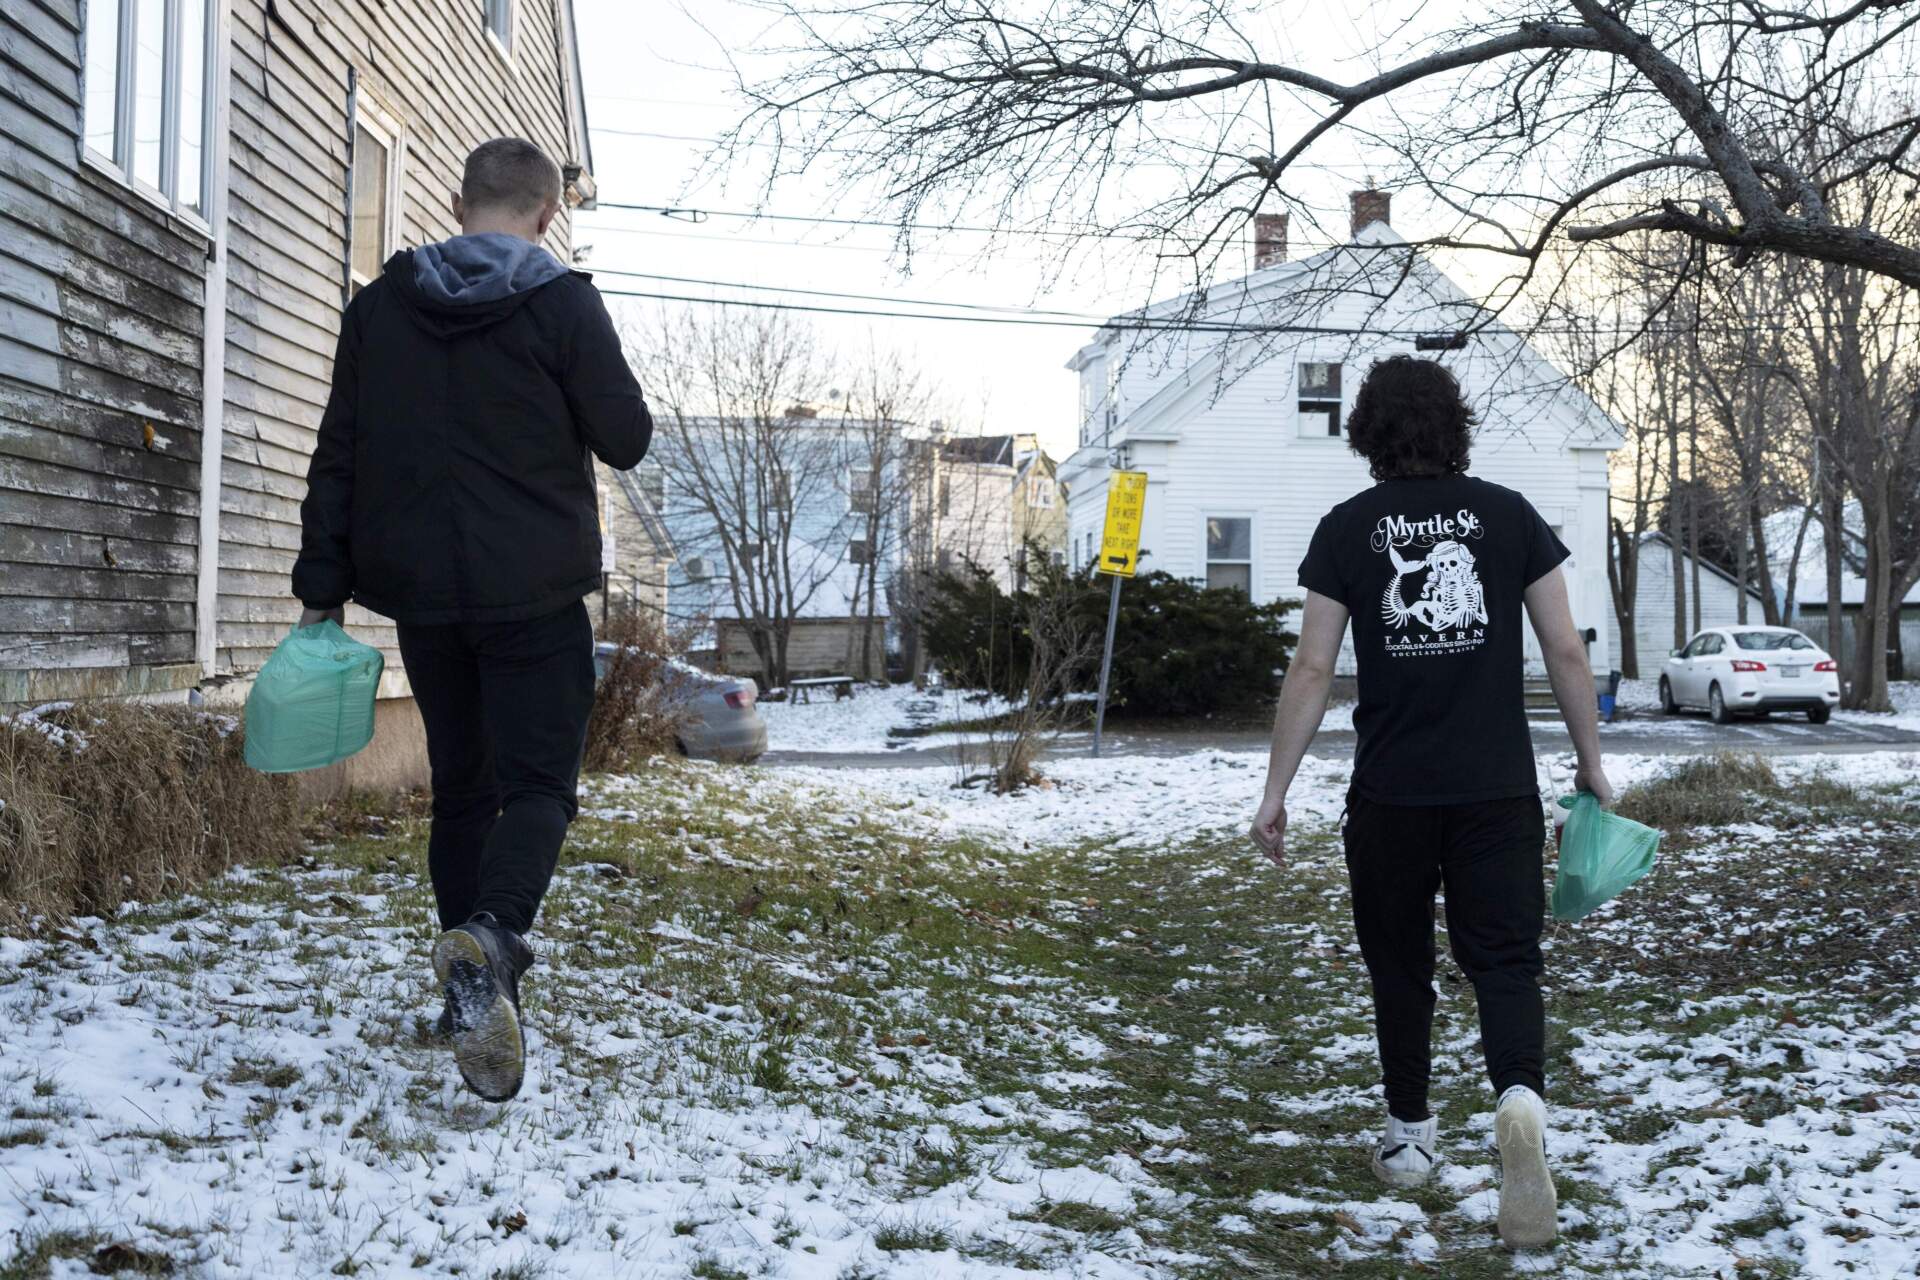 Timmy, left, and Harry, both now 17, used to have frequent encounters with the police in Rockland. Credit: Ashley L. Conti for The New York Times